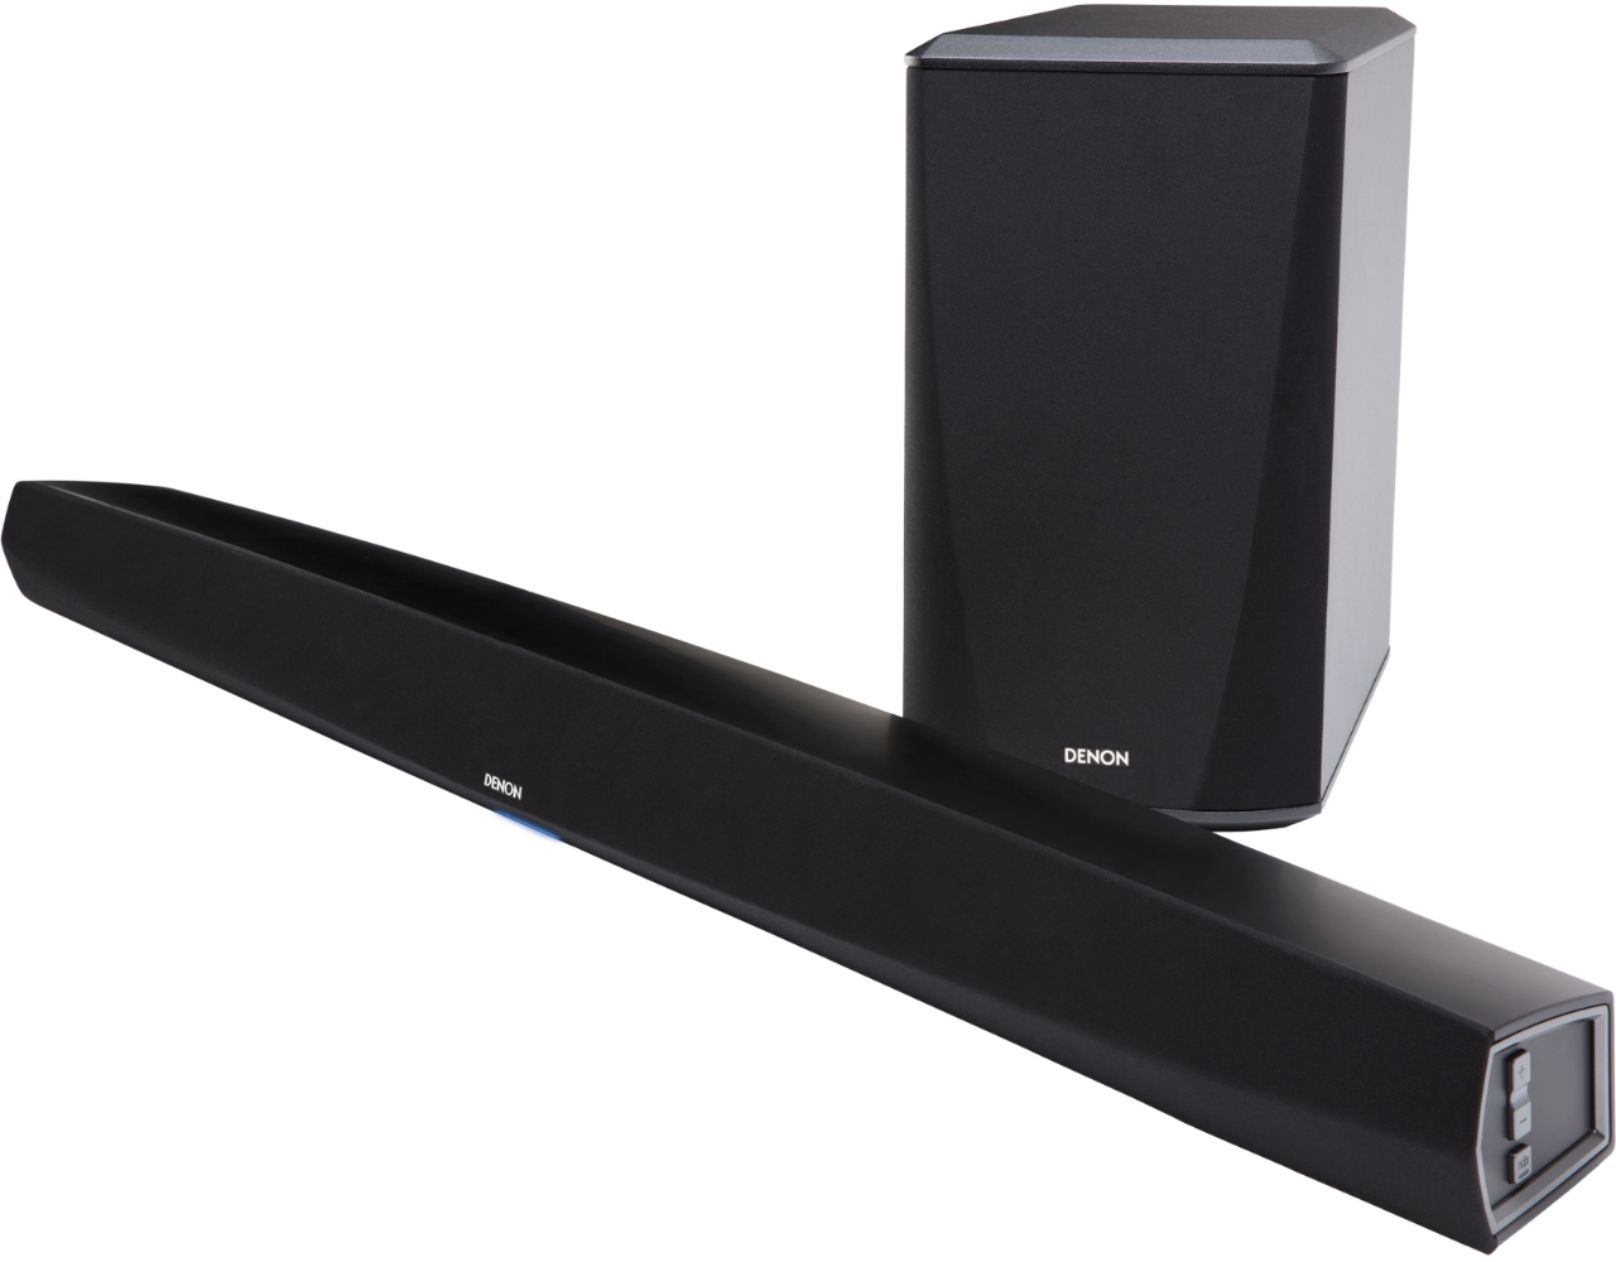 Denon DHTS516 Slim Home Theater Sound Bar with Wireless